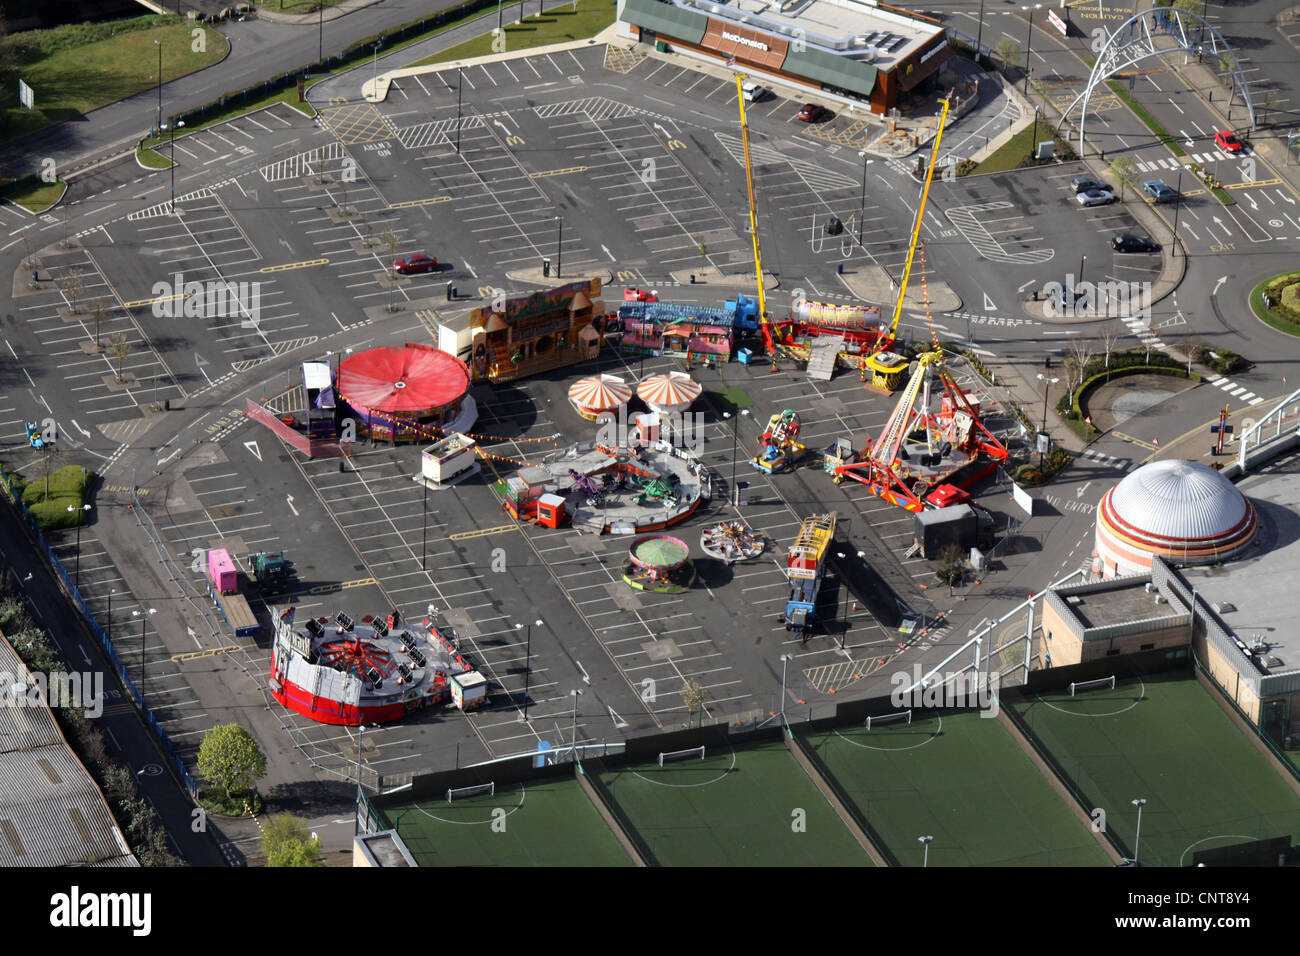 aerial view of a funfair in a car park early morning Stock Photo